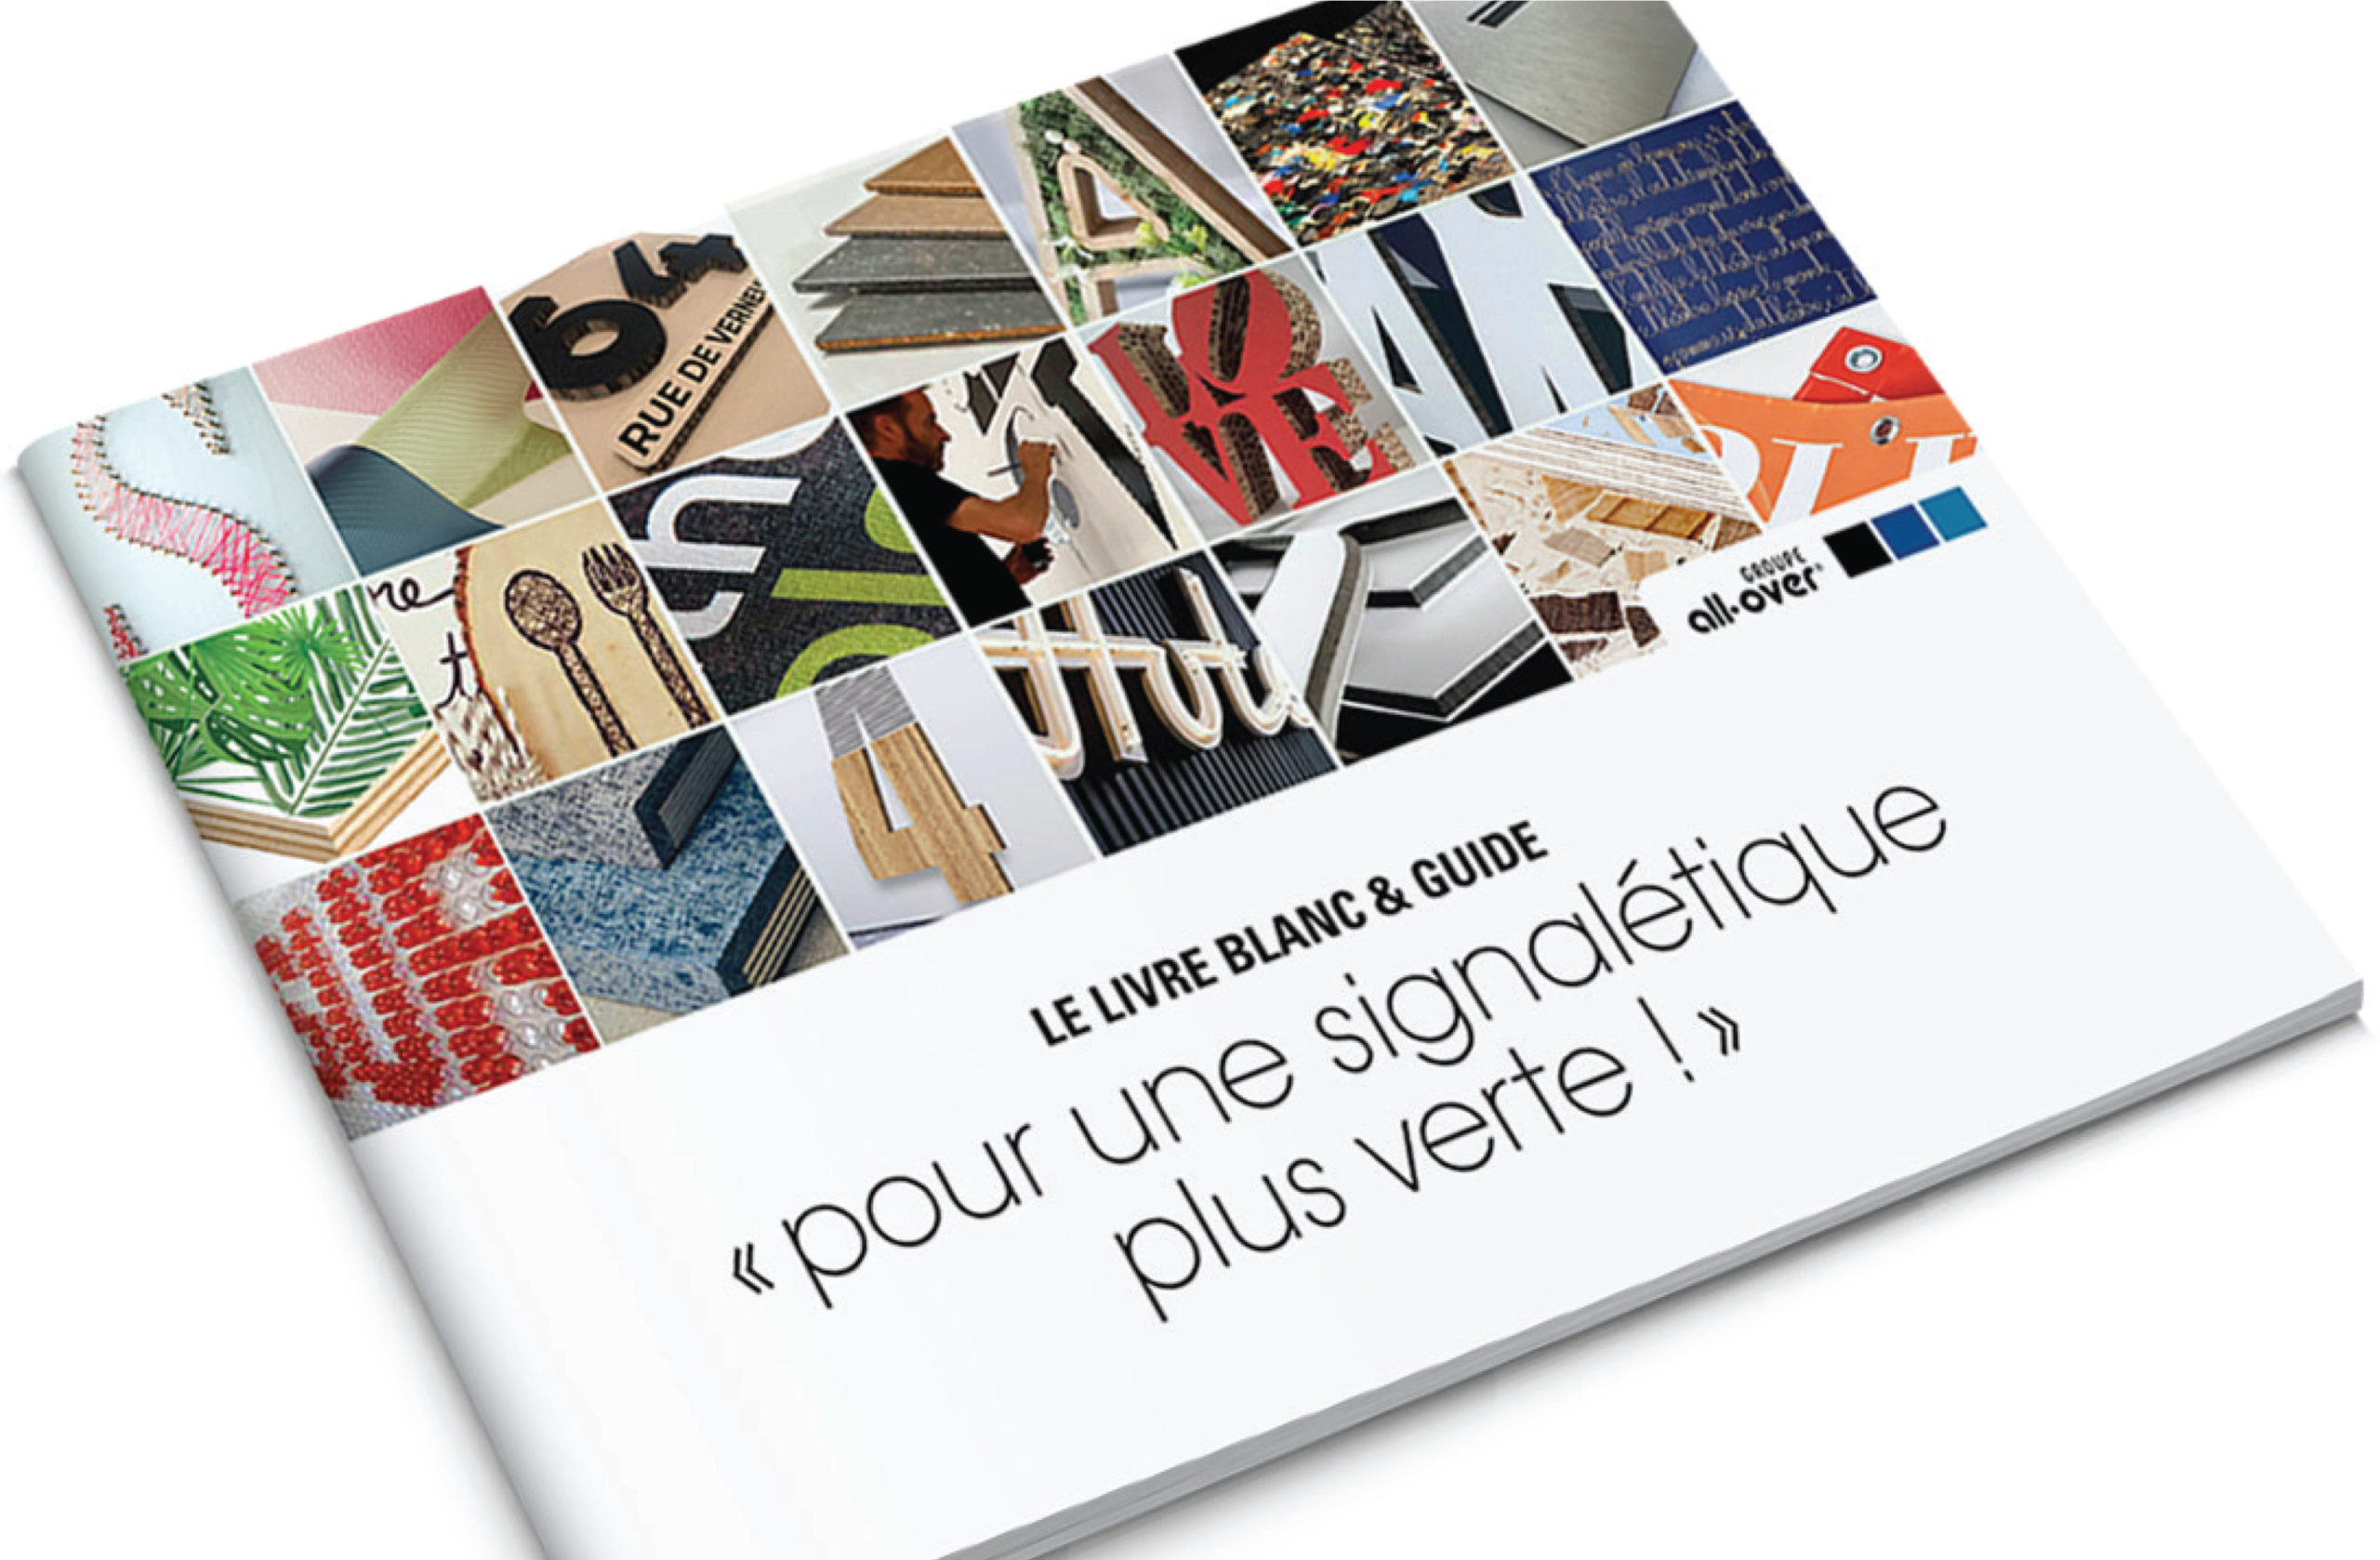 Livre-blanc-production-durable-all-over-scaled